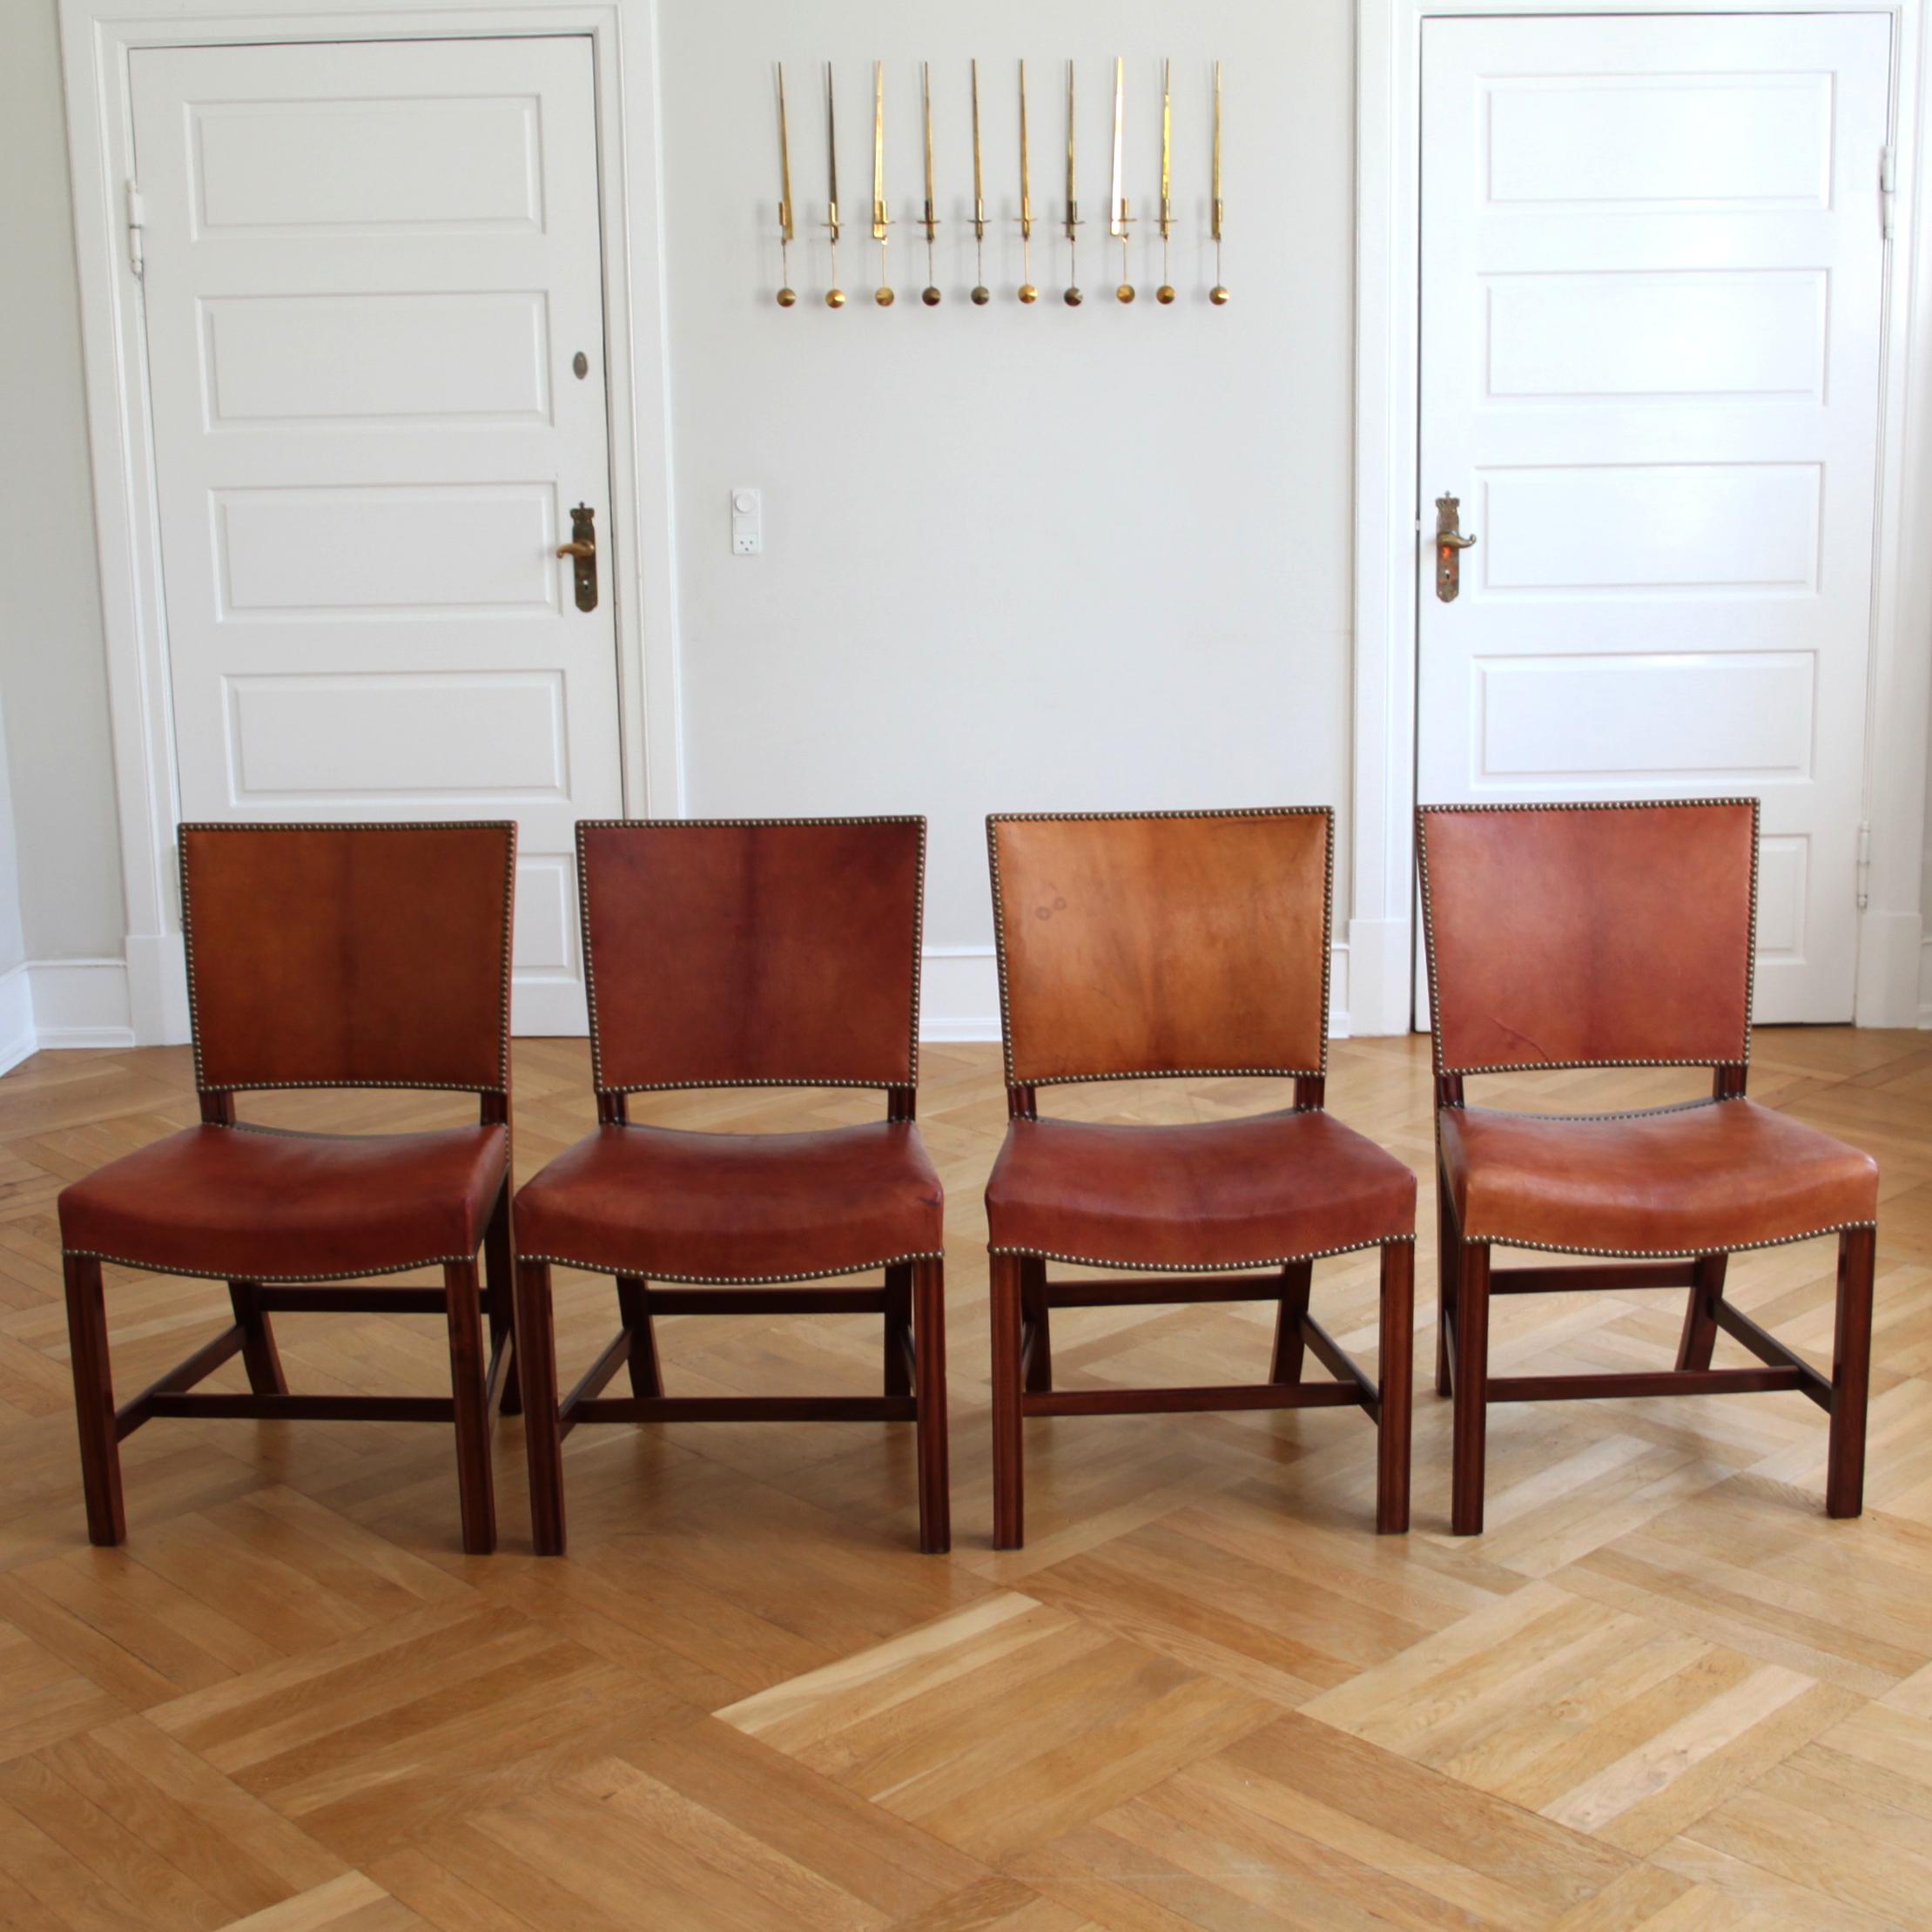 European Set of 14 Kaare Klint Red Chairs, Niger Leather, Mahogany